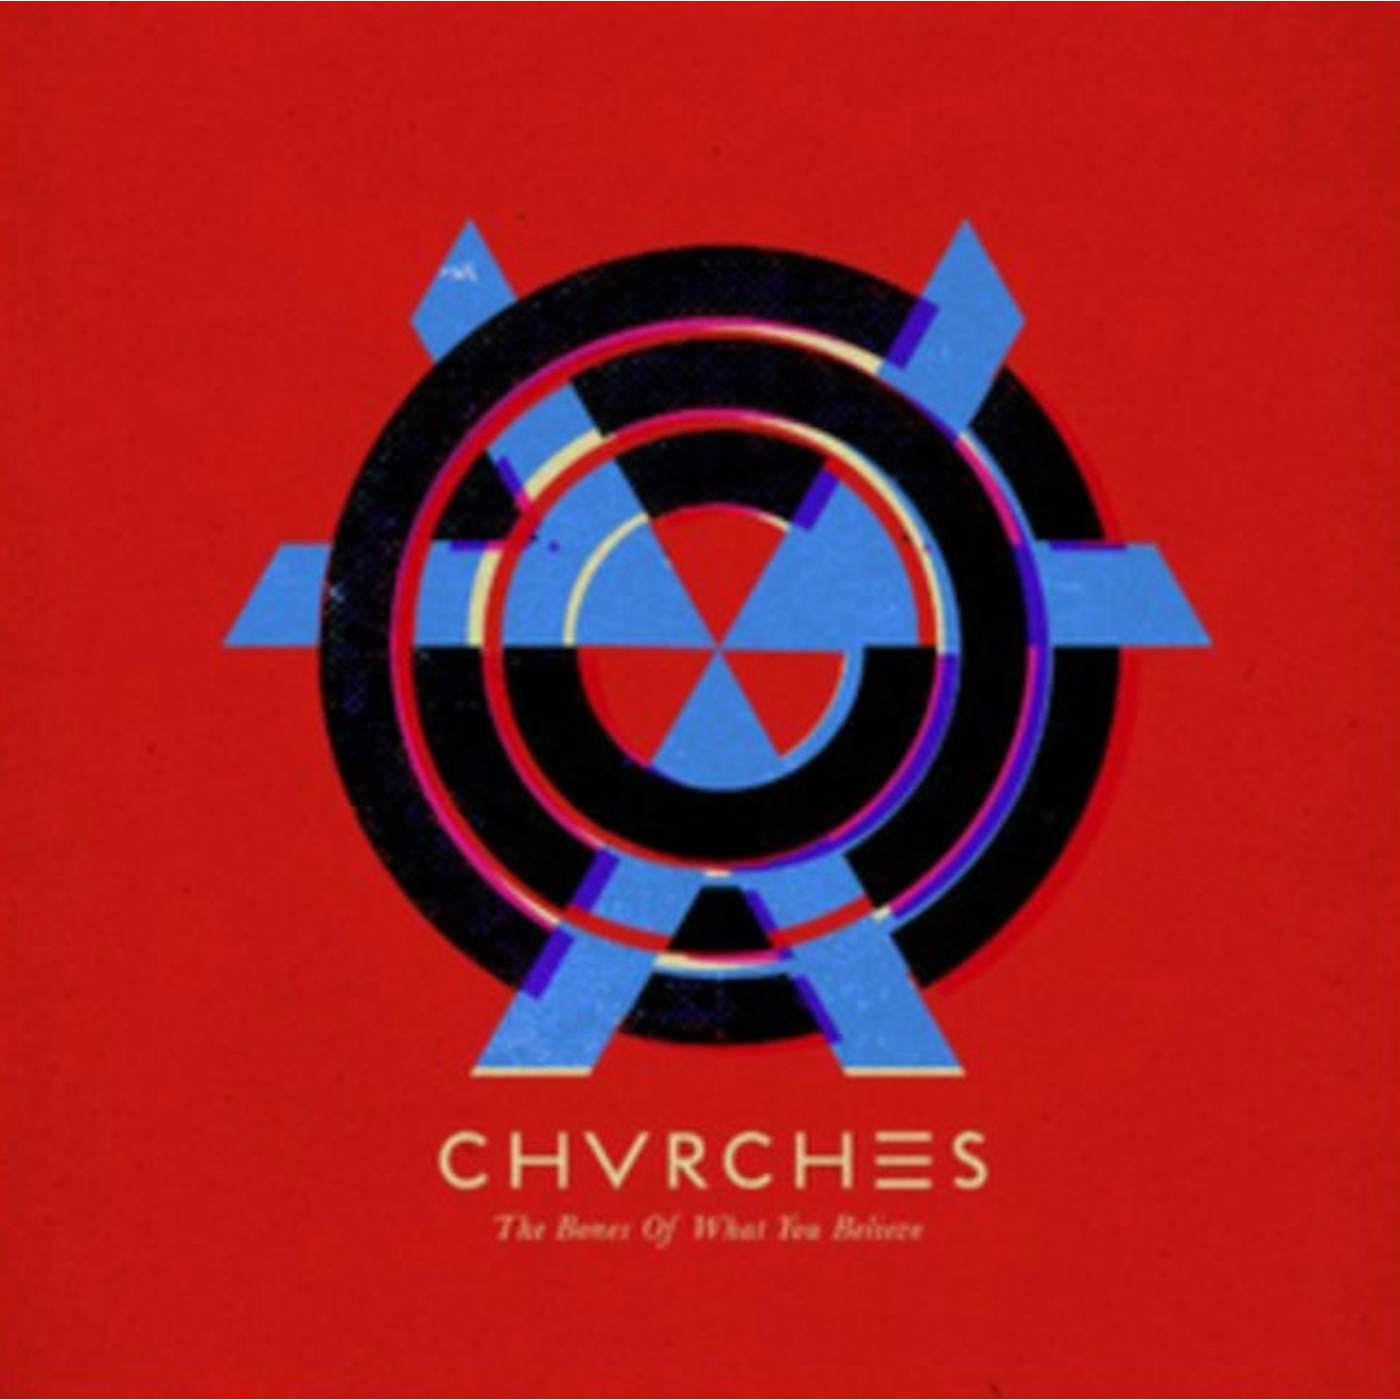 Chvrches LP Vinyl Record - The Bones Of What You Believe